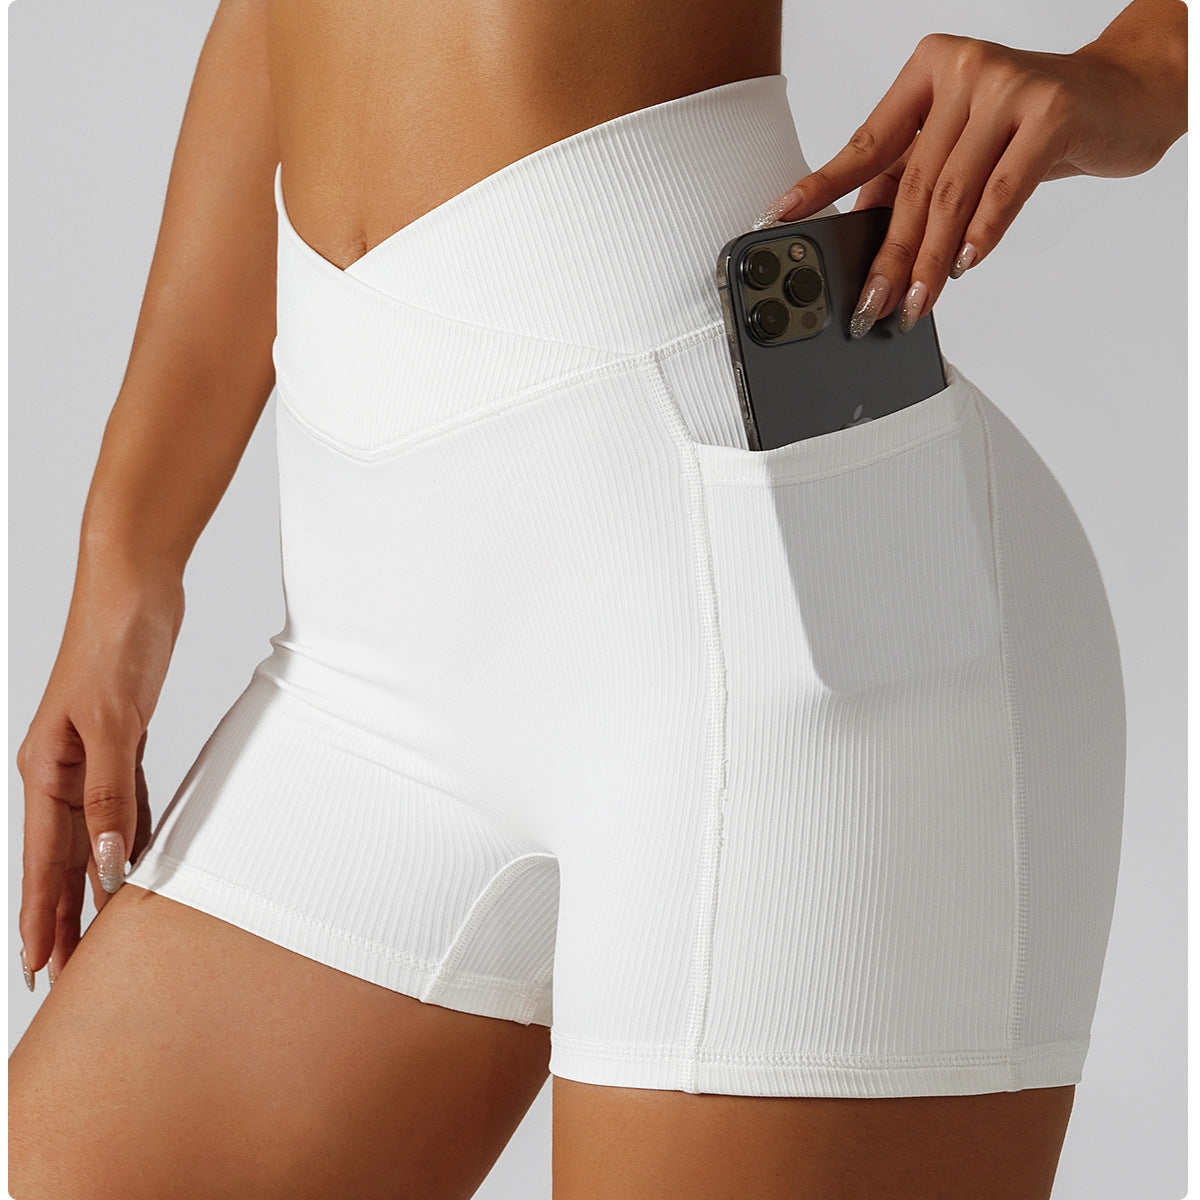 Wholesale Workout Fitness Slimming Shorts